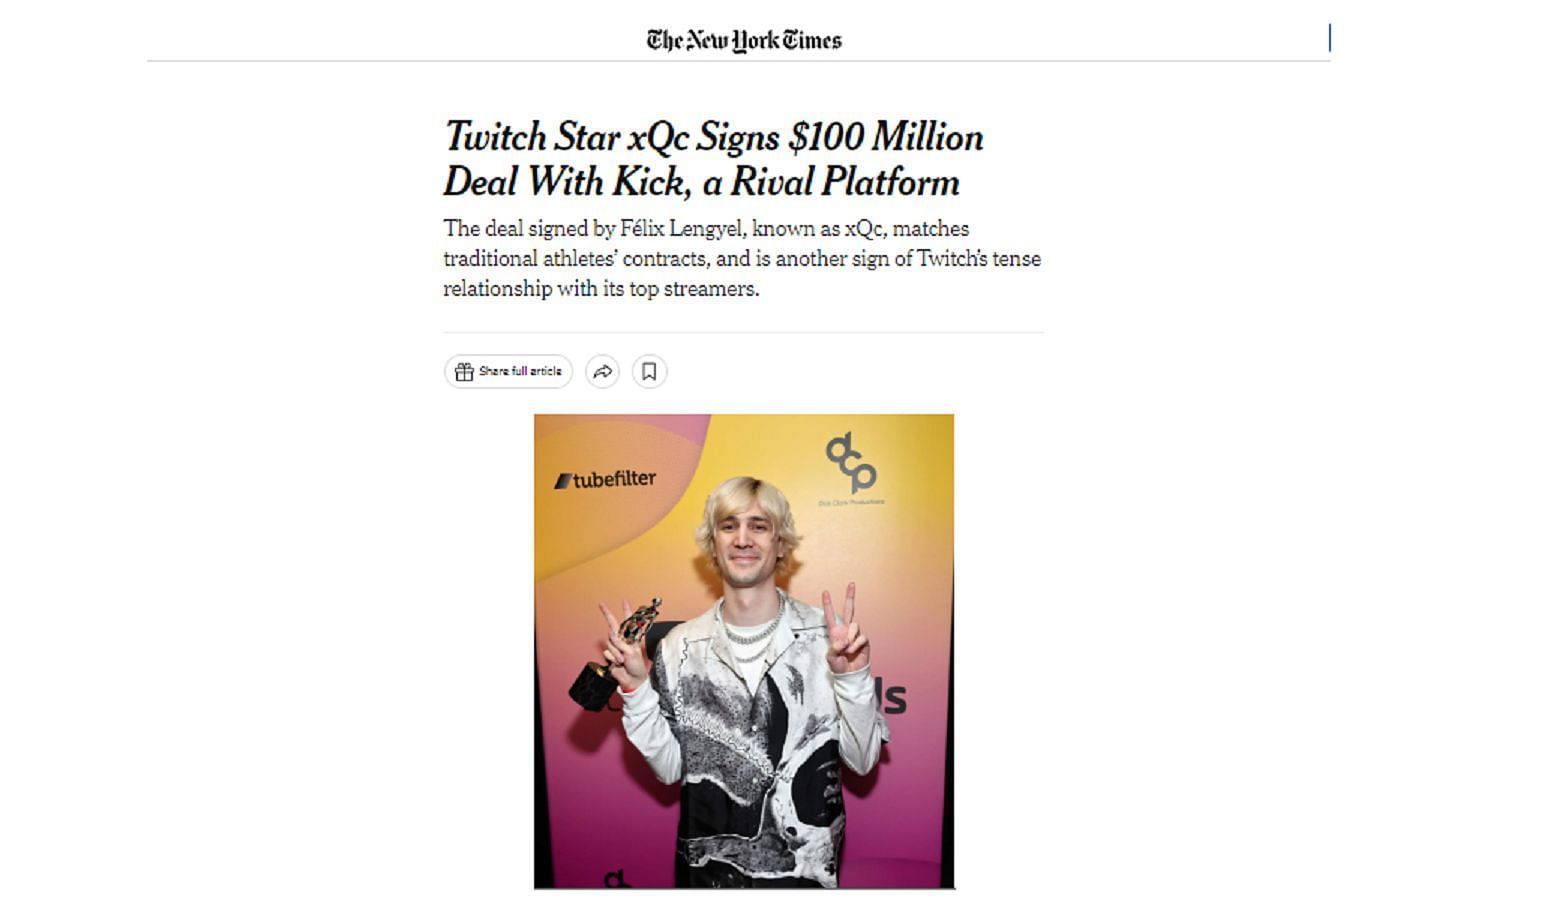 Felix signed a massive 100 million on-exclusive deal with Kick.com (Image via New York Times)